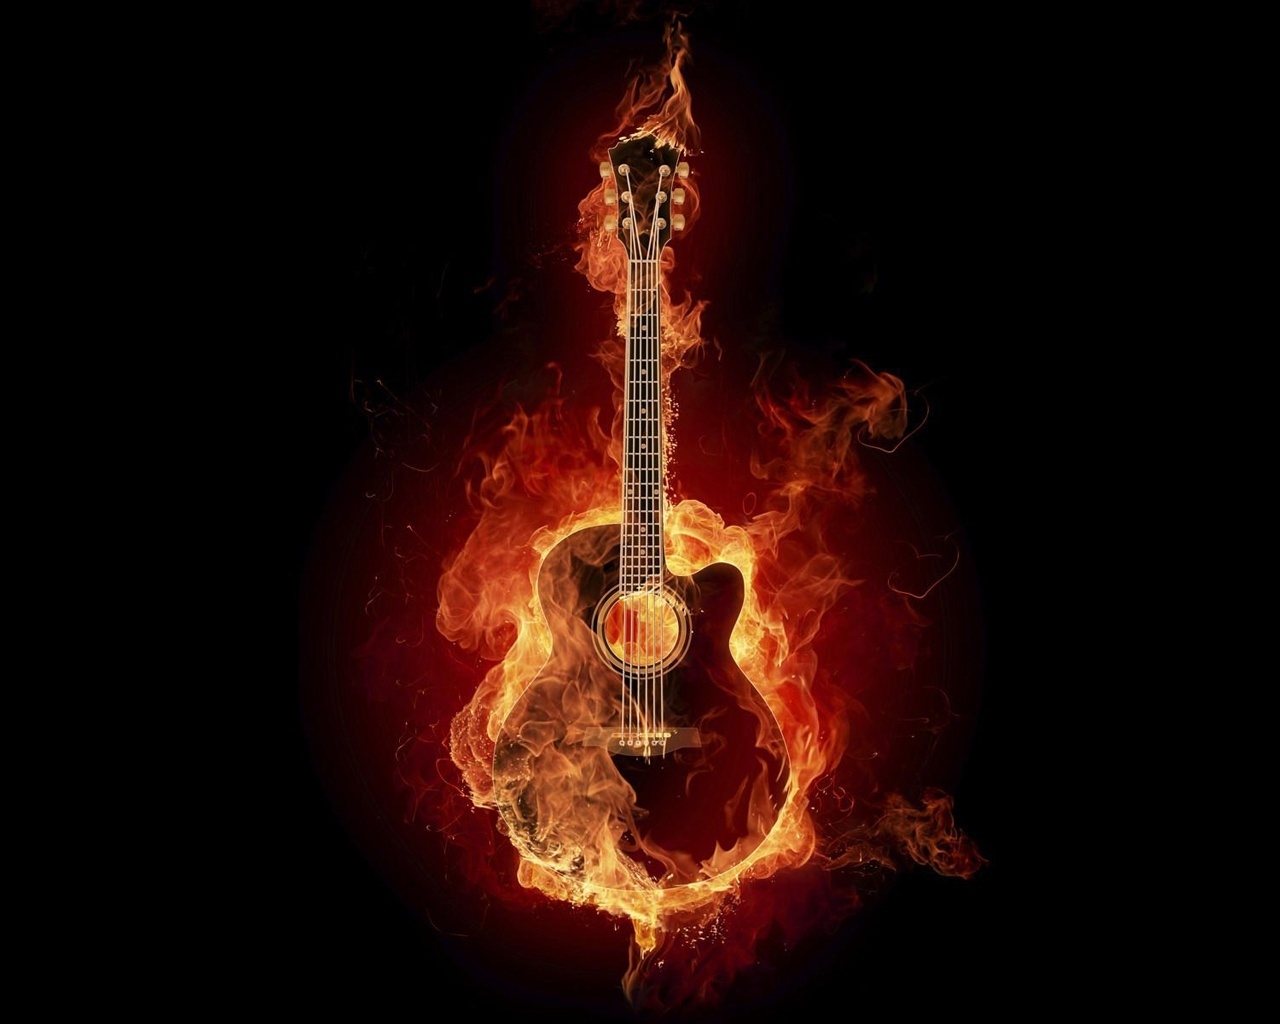 Great Fire Guitar for 1280 x 1024 resolution